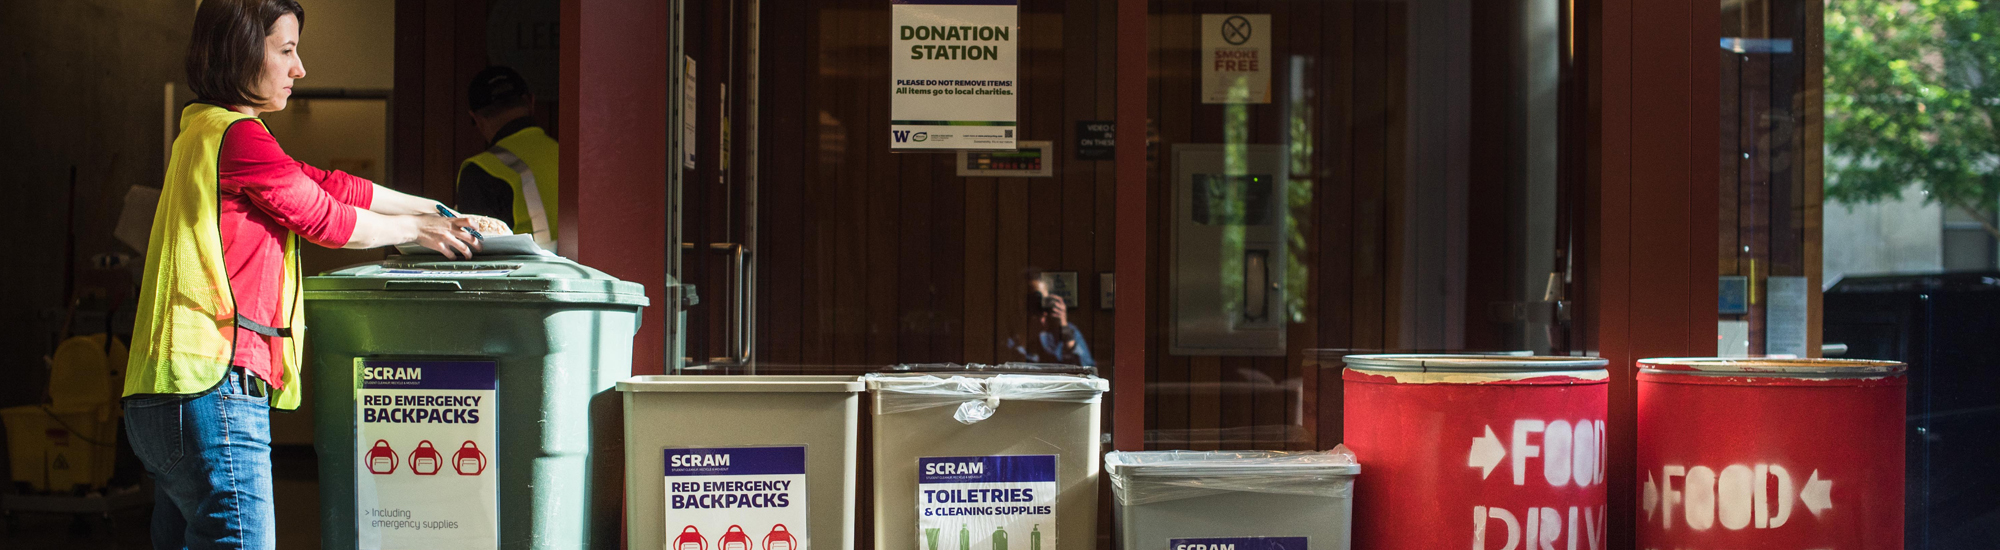 SCRAM donation bins lined up in residence hall